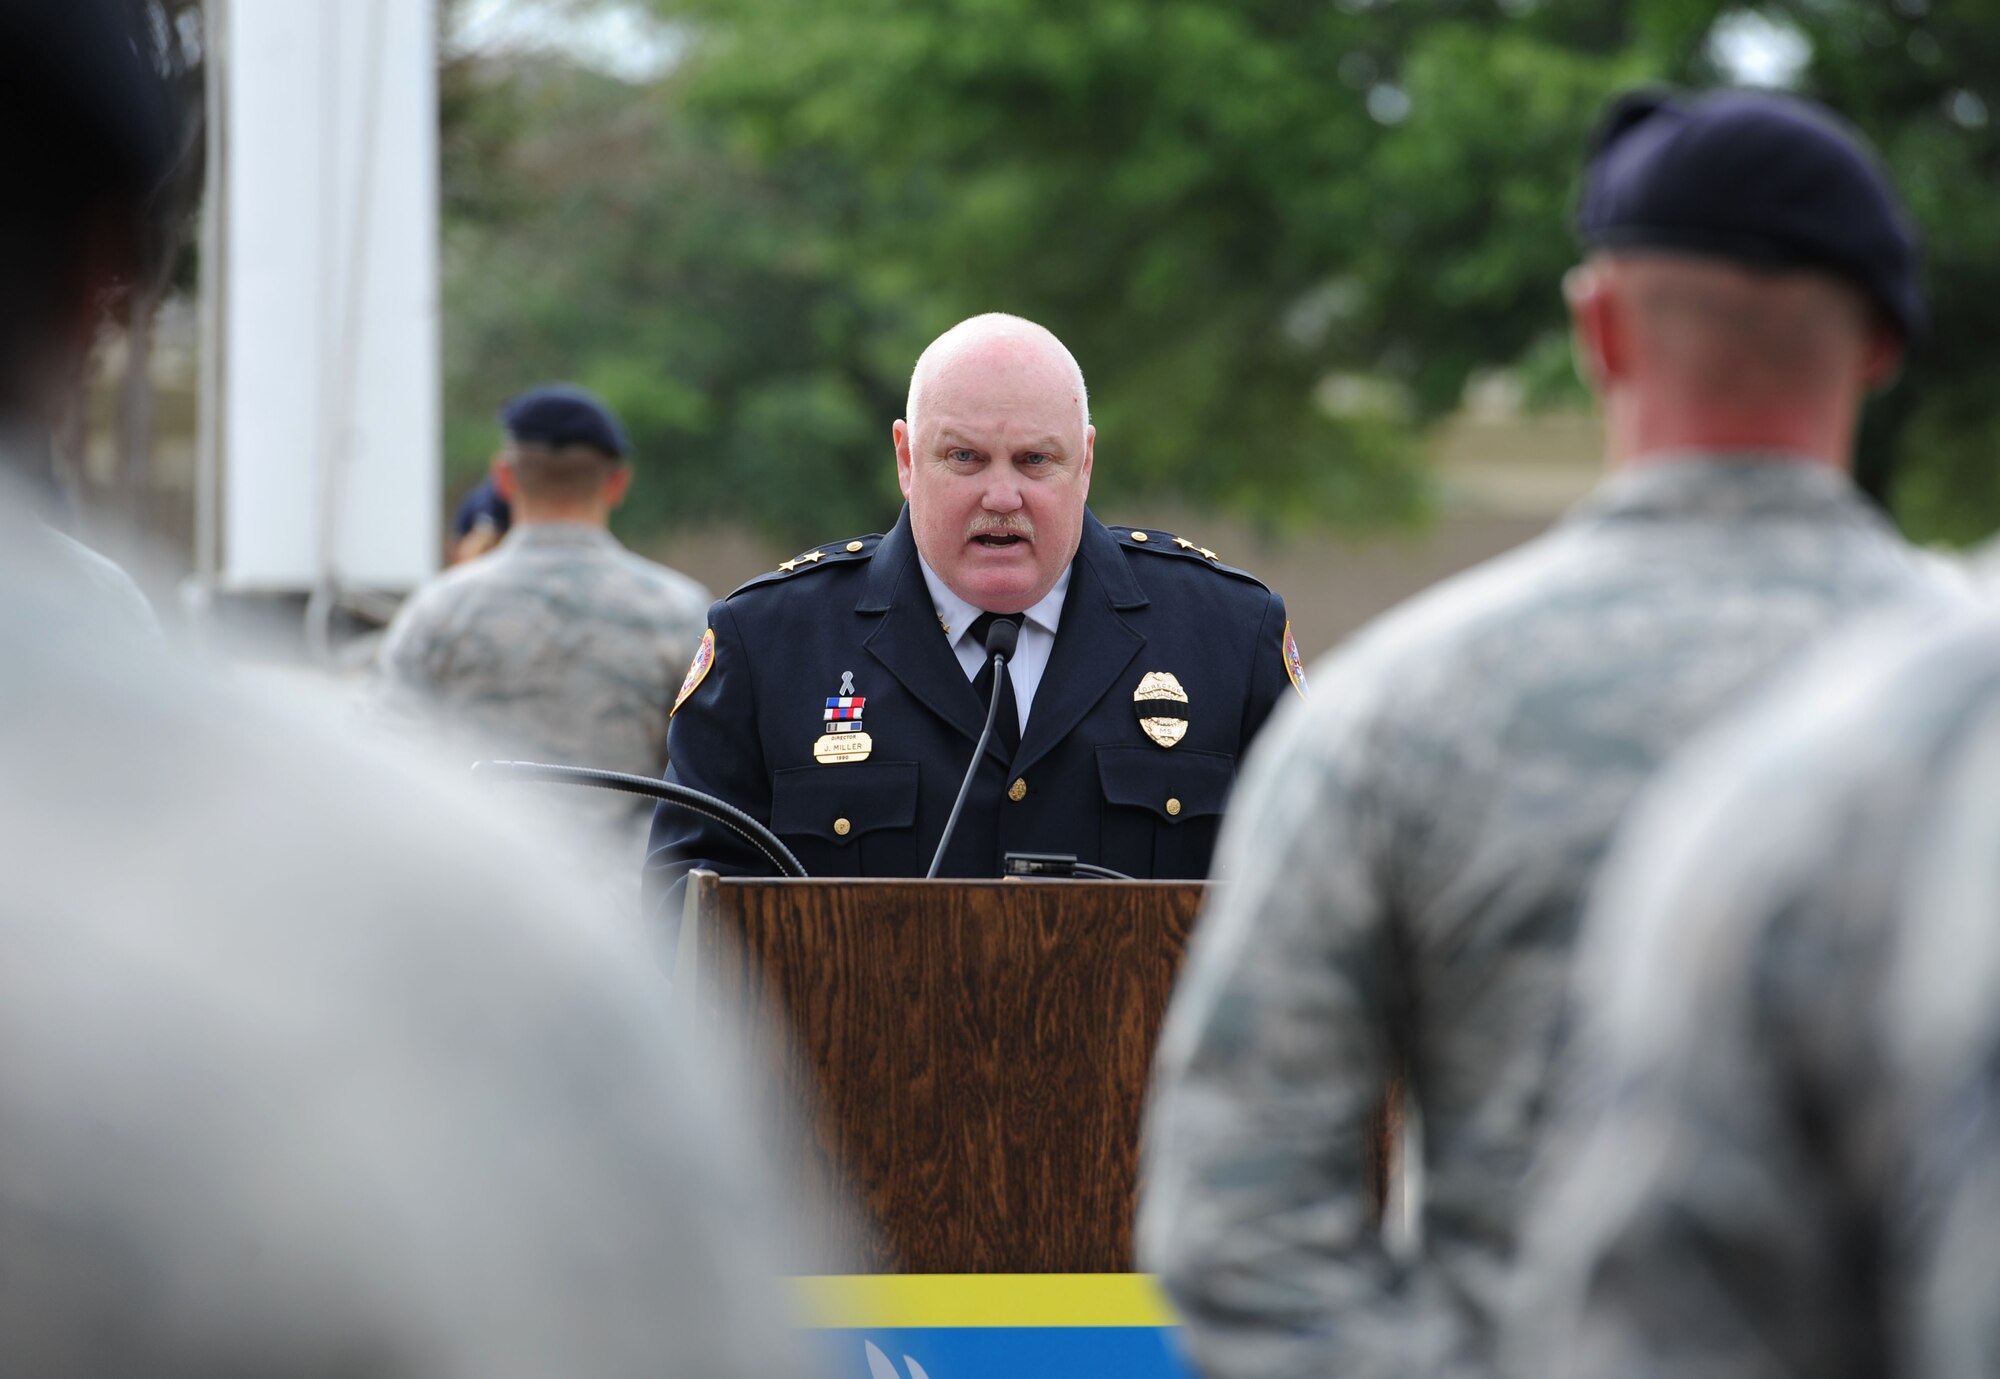 Chief John Miller, Biloxi Police Department director, delivers remarks during the 81st Security Forces Squadron retreat ceremony May 18, 2017, on Keesler Air Force Base, Miss. The event was held during National Police Week, which recognizes the service of law enforcement men and women who put their lives at risk every day. (U.S. Air Force photo by Kemberly Groue)